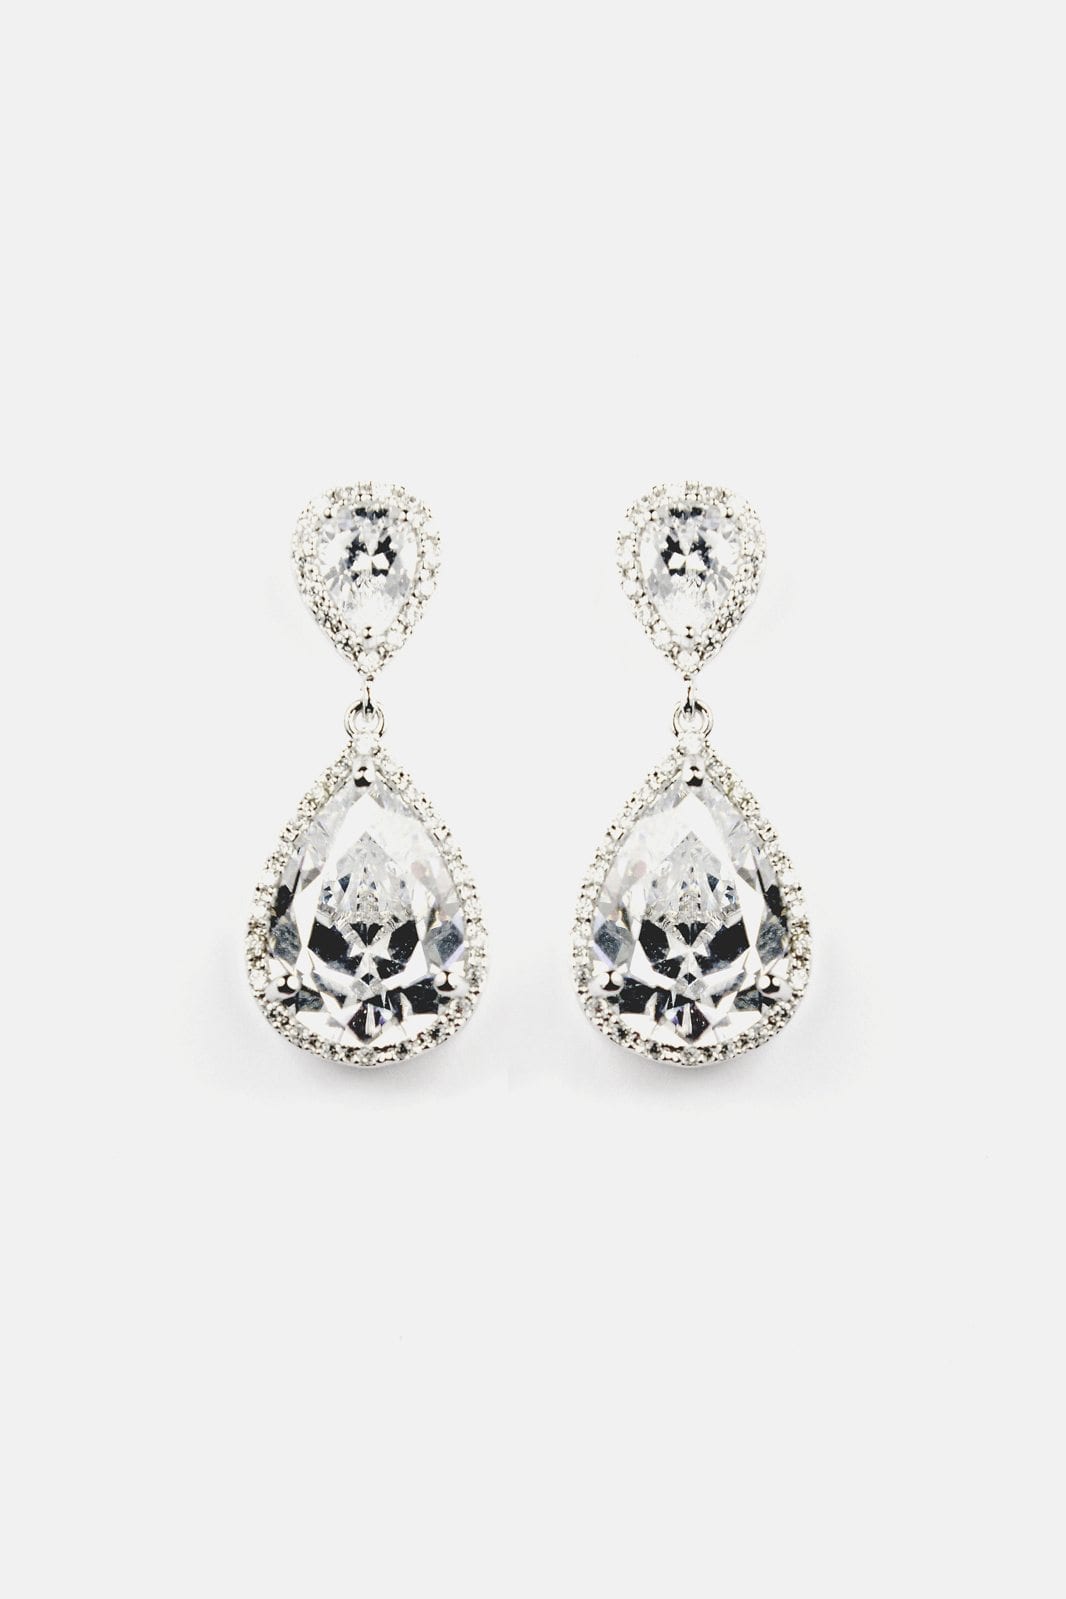 Shop For Isabella Earrings (SOLD) – Jessica Bridal